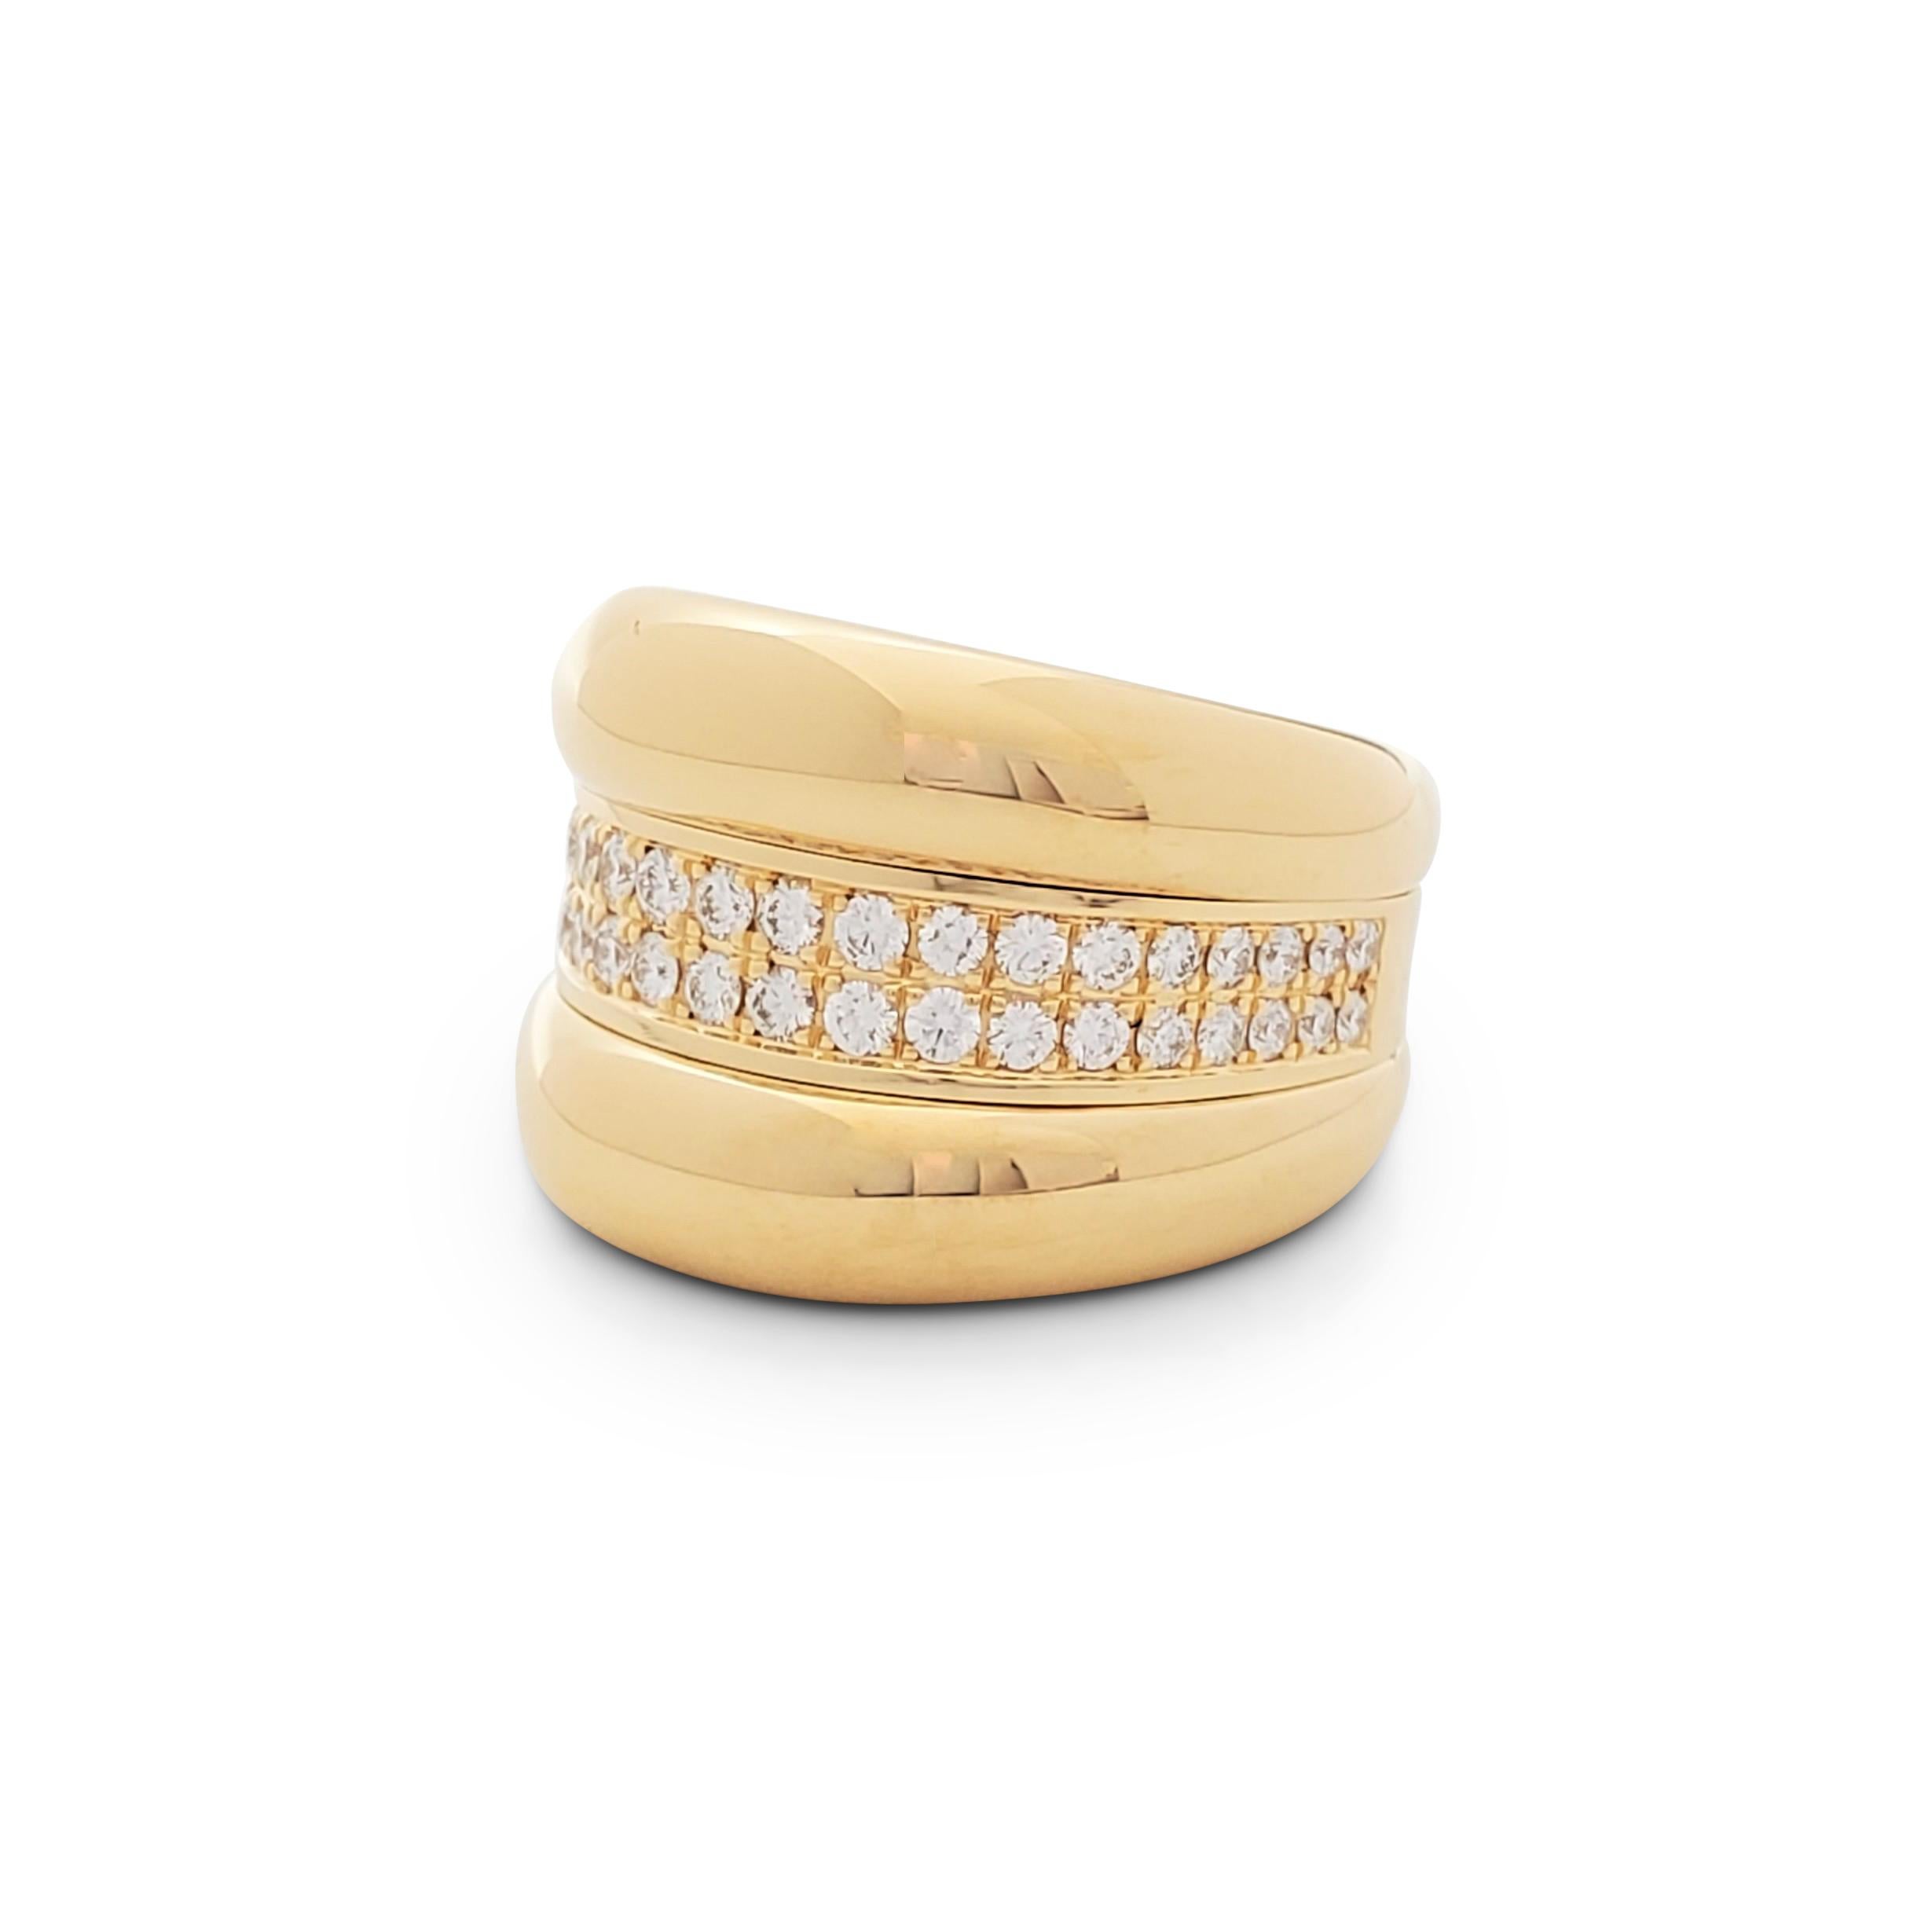 Authentic Chopard 'La Strada' ring crafted in 18 karat yellow gold. The ring is comprised of three sections, the center section set with round brilliant cut diamonds weighing an estimated 0.65 carats (E-F color, VS clarity). Signed Chopard, 750,